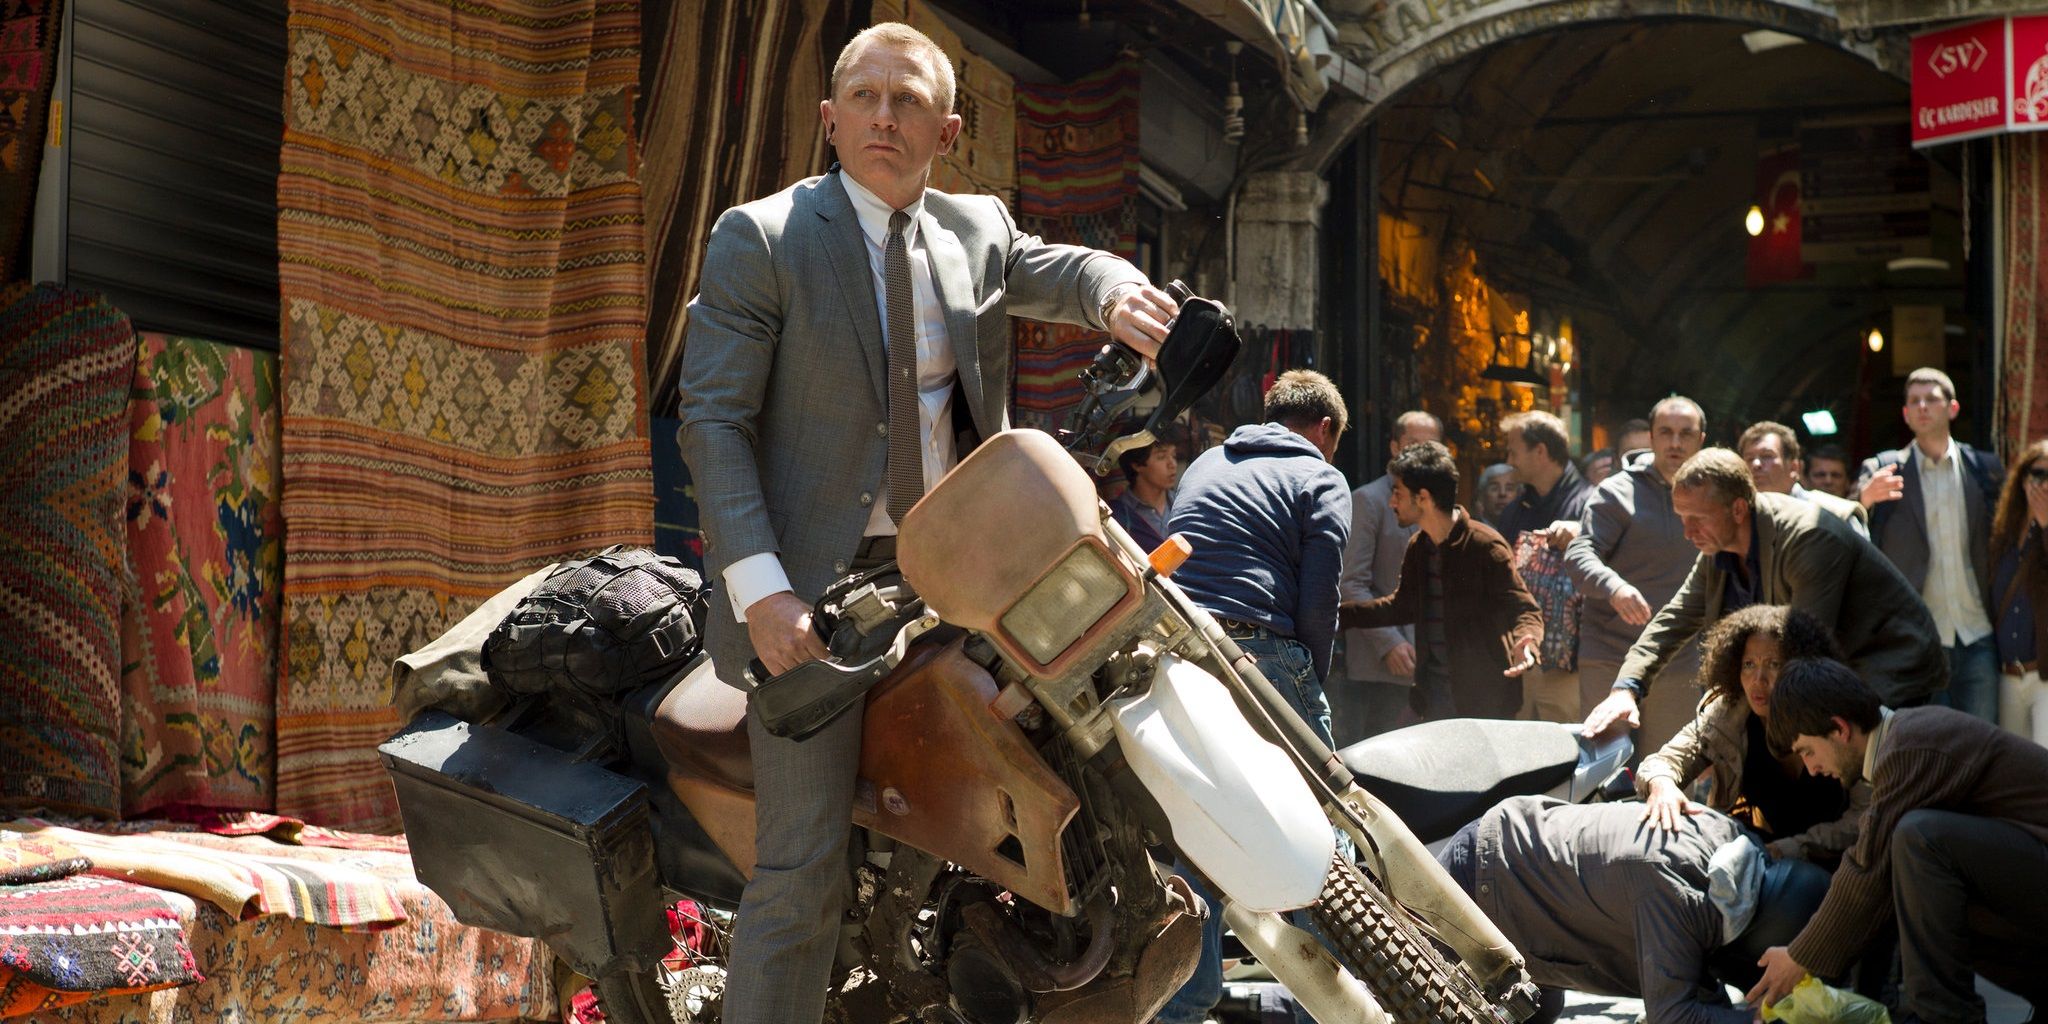 James Bond on a motorcycle in Skyfall